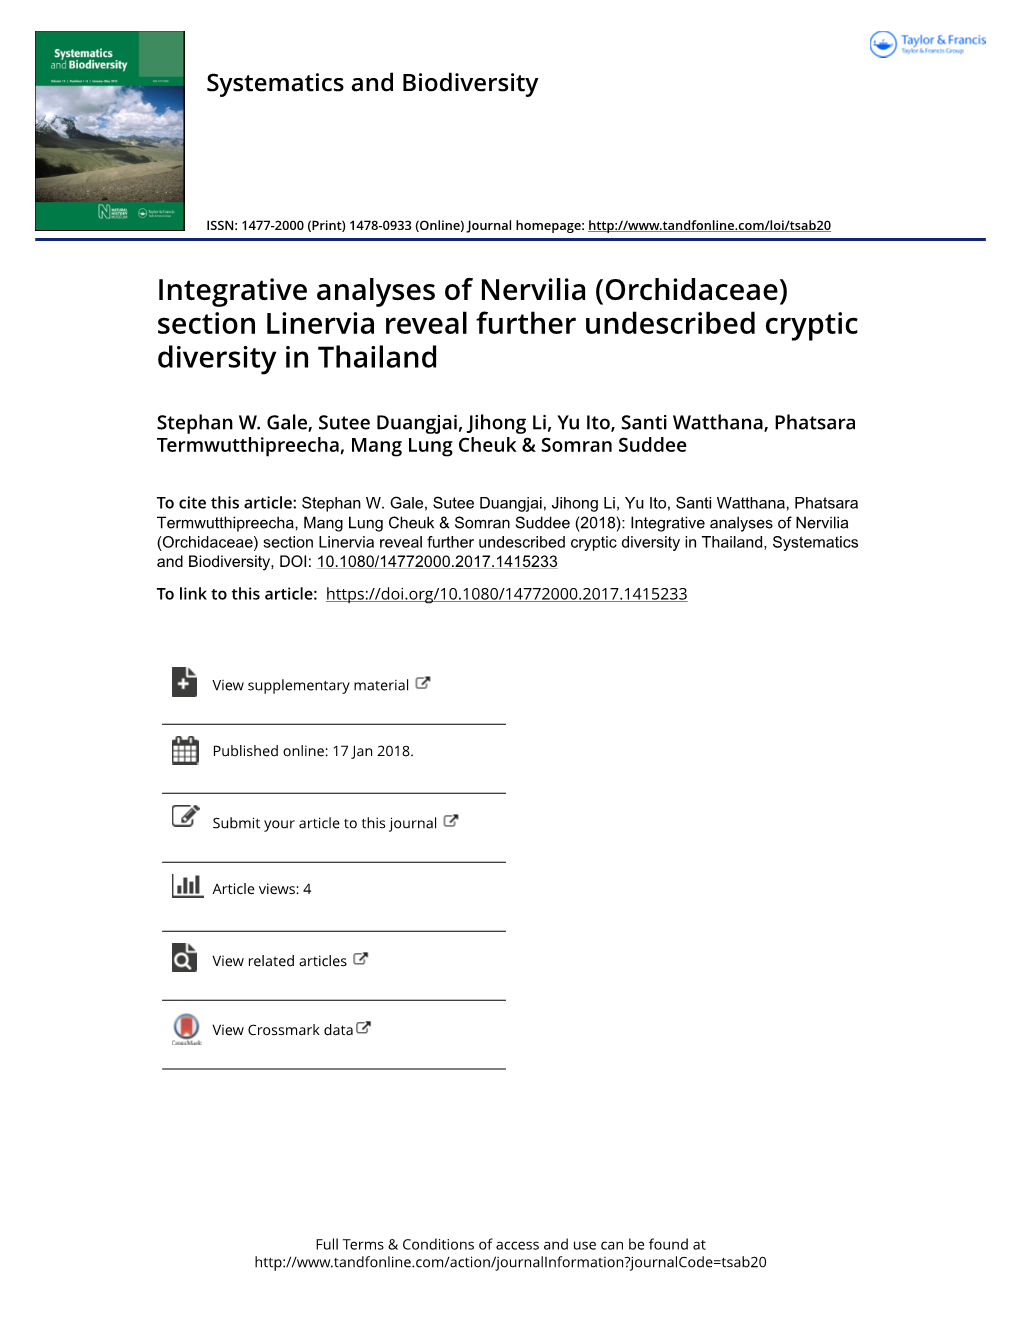 Integrative Analyses of Nervilia (Orchidaceae) Section Linervia Reveal Further Undescribed Cryptic Diversity in Thailand